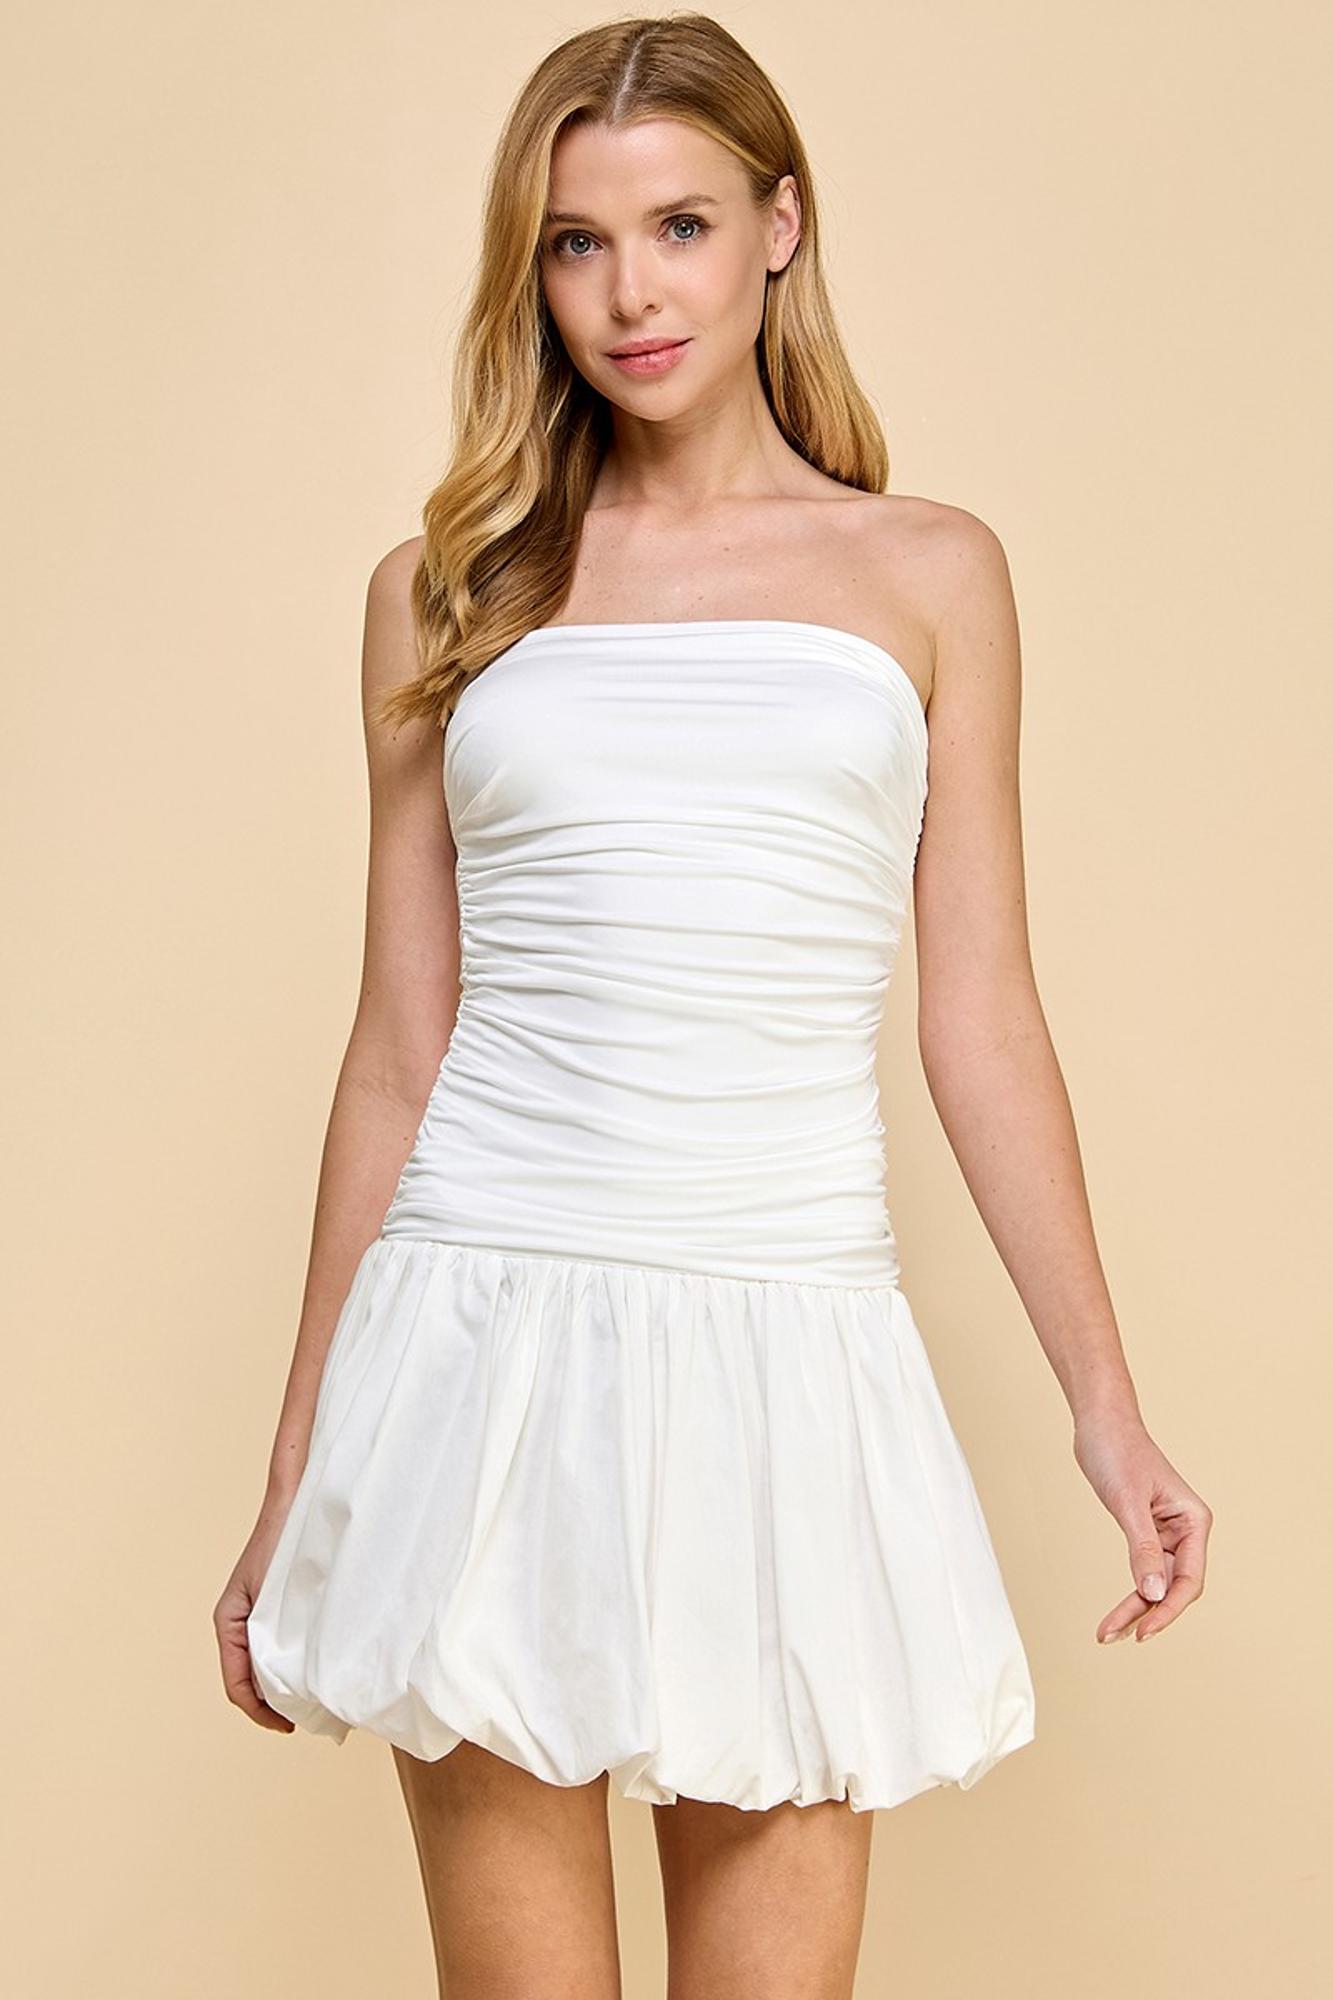 The Good One Strapless Ruched Dress